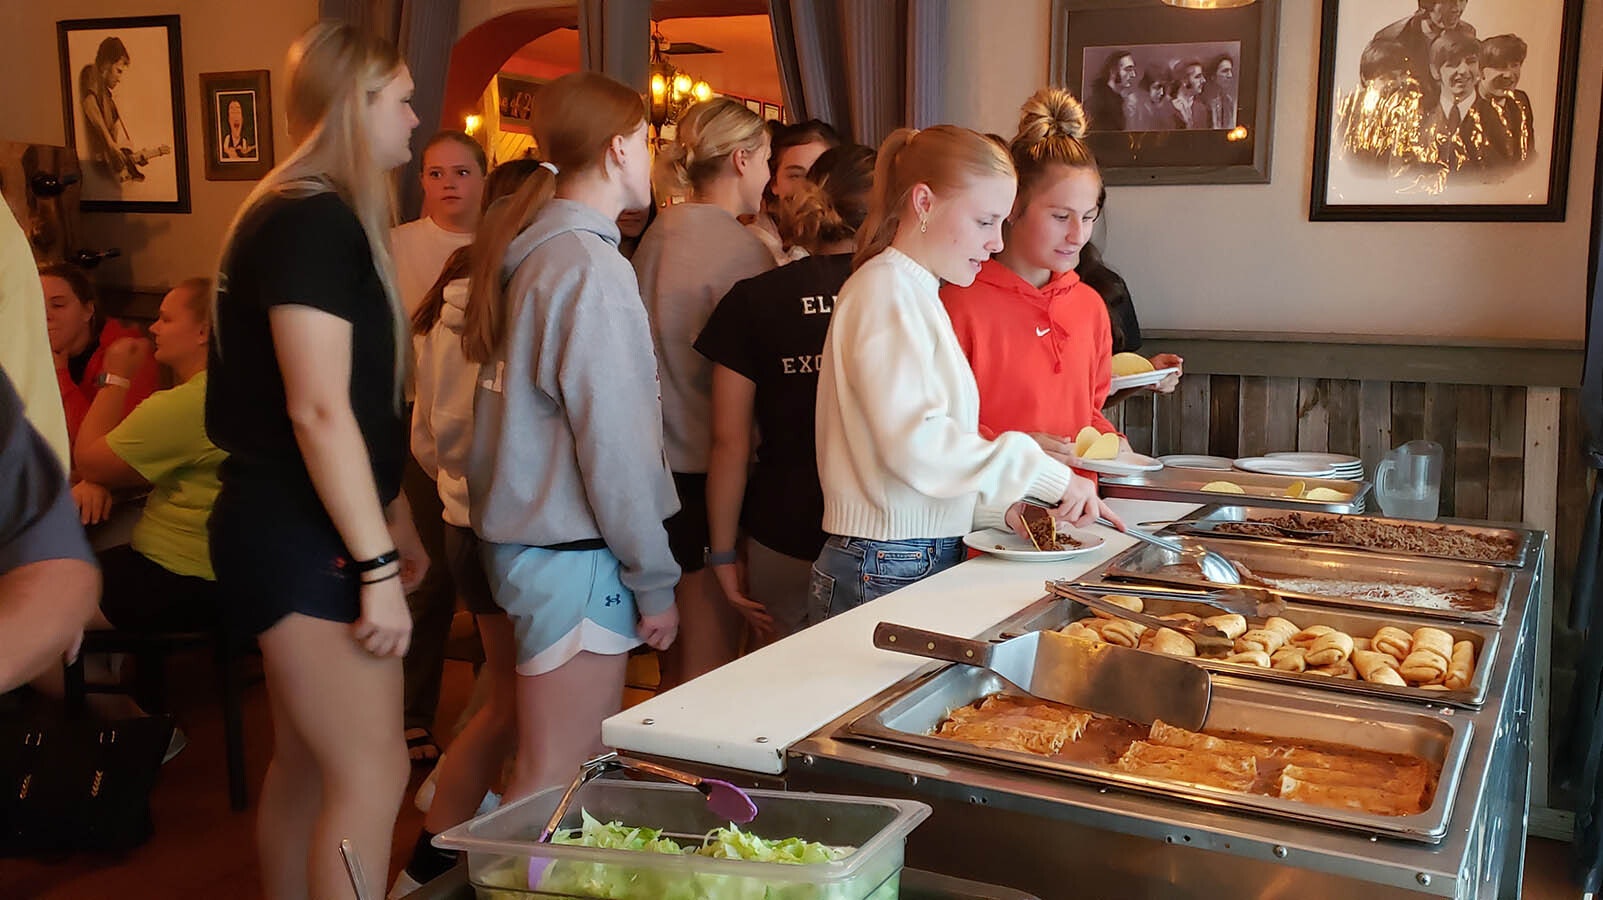 Rawlins High School volleyball team members line up for a free buffet with a choice of tacos, enchiladas and burritos at Mike's Big City Steakhouse in Rawlins. The eatery routinely feeds local sports teams free before they play.